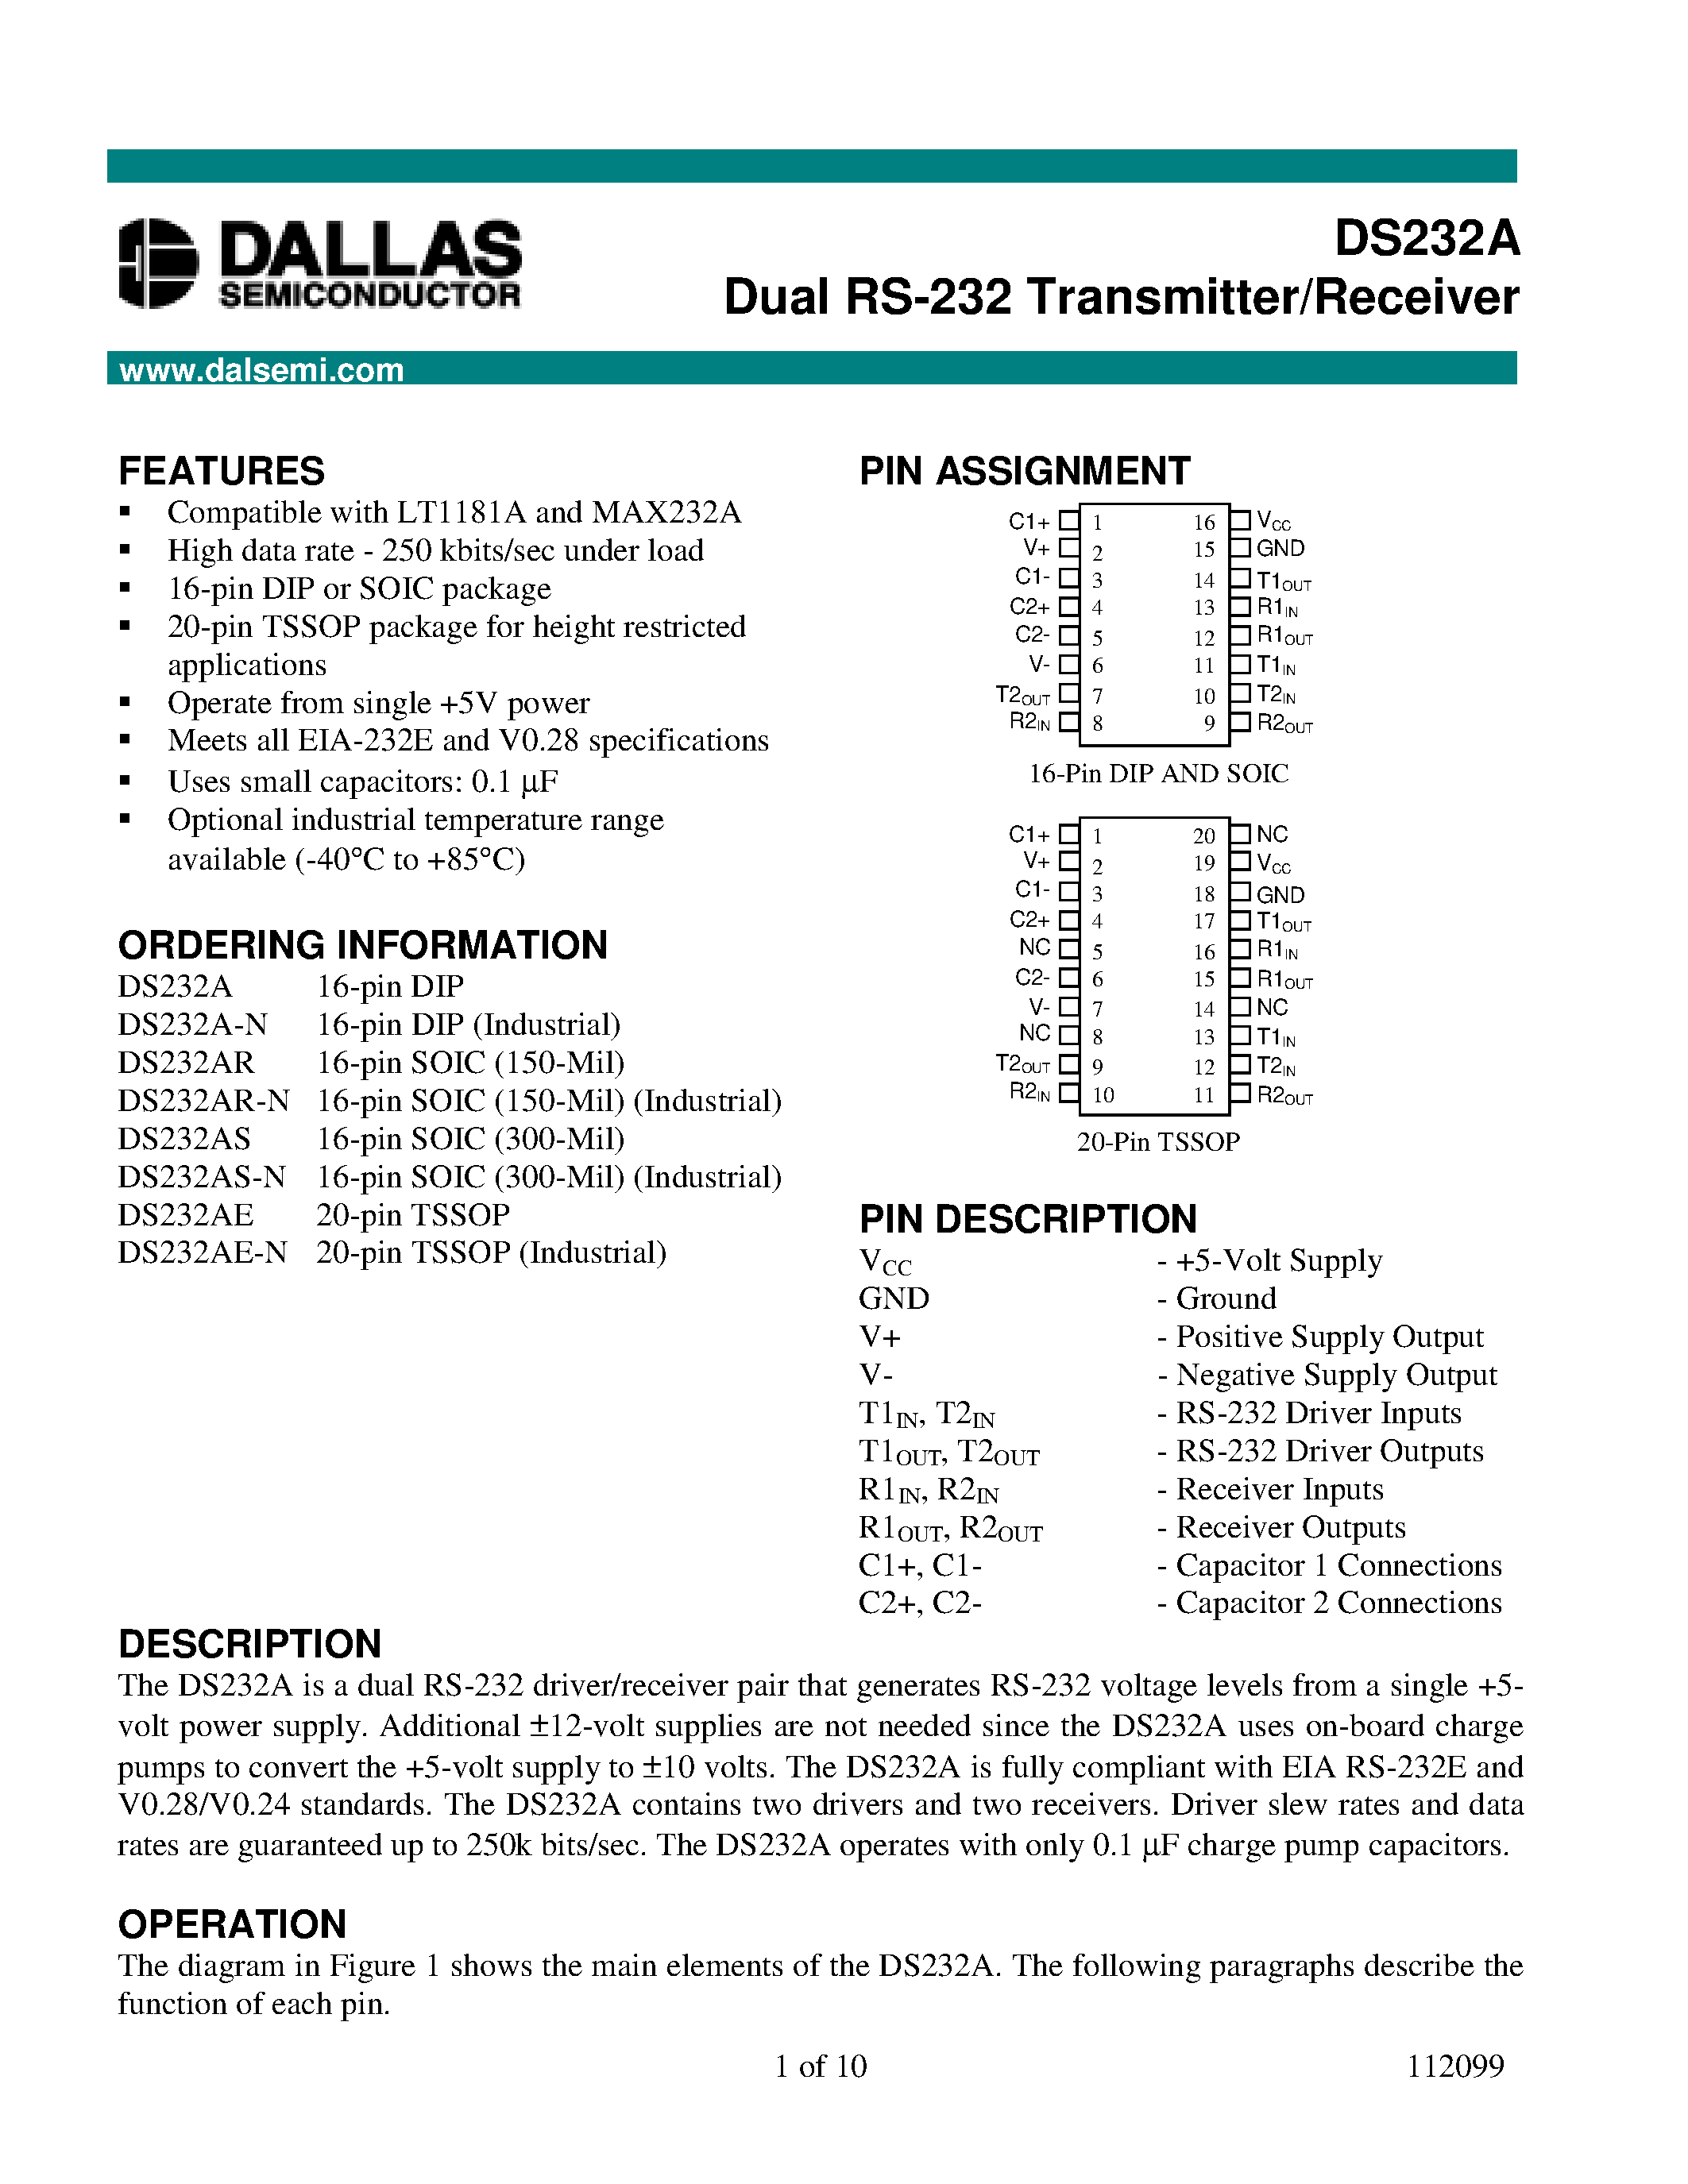 Datasheet DS232AR-N - Dual RS-232 Transmitter/Receiver page 1